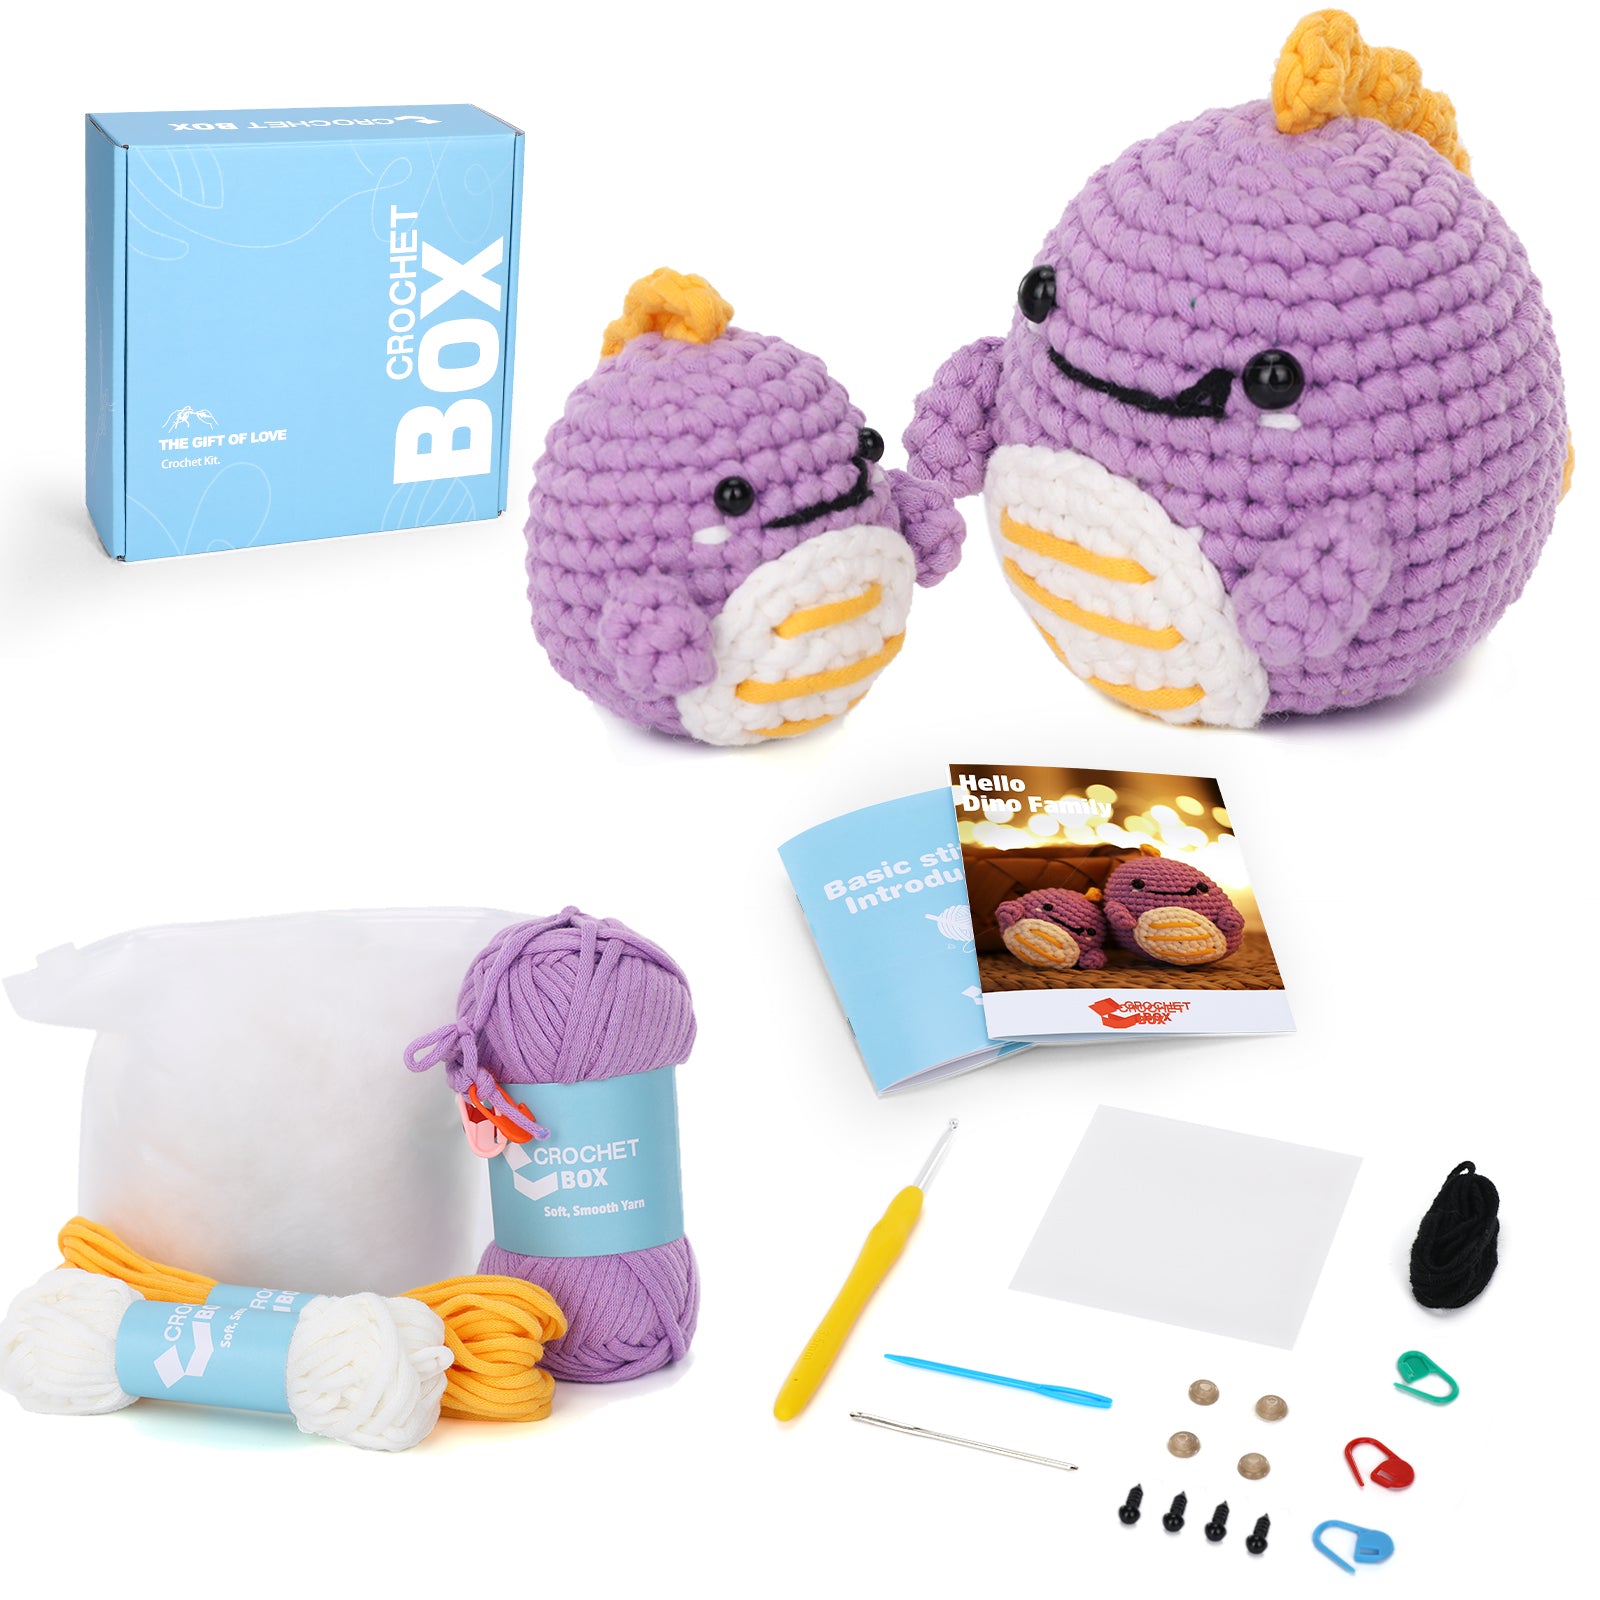 Crochet Kit for Beginners Adults - Dinosaur Starters Crocheting Animal Kits for Kids, Birthday DIY Craft Gift with Crochet Yarns, Hook, Step-by-Step Video, Instruction and Crochet Accessories, Light purple